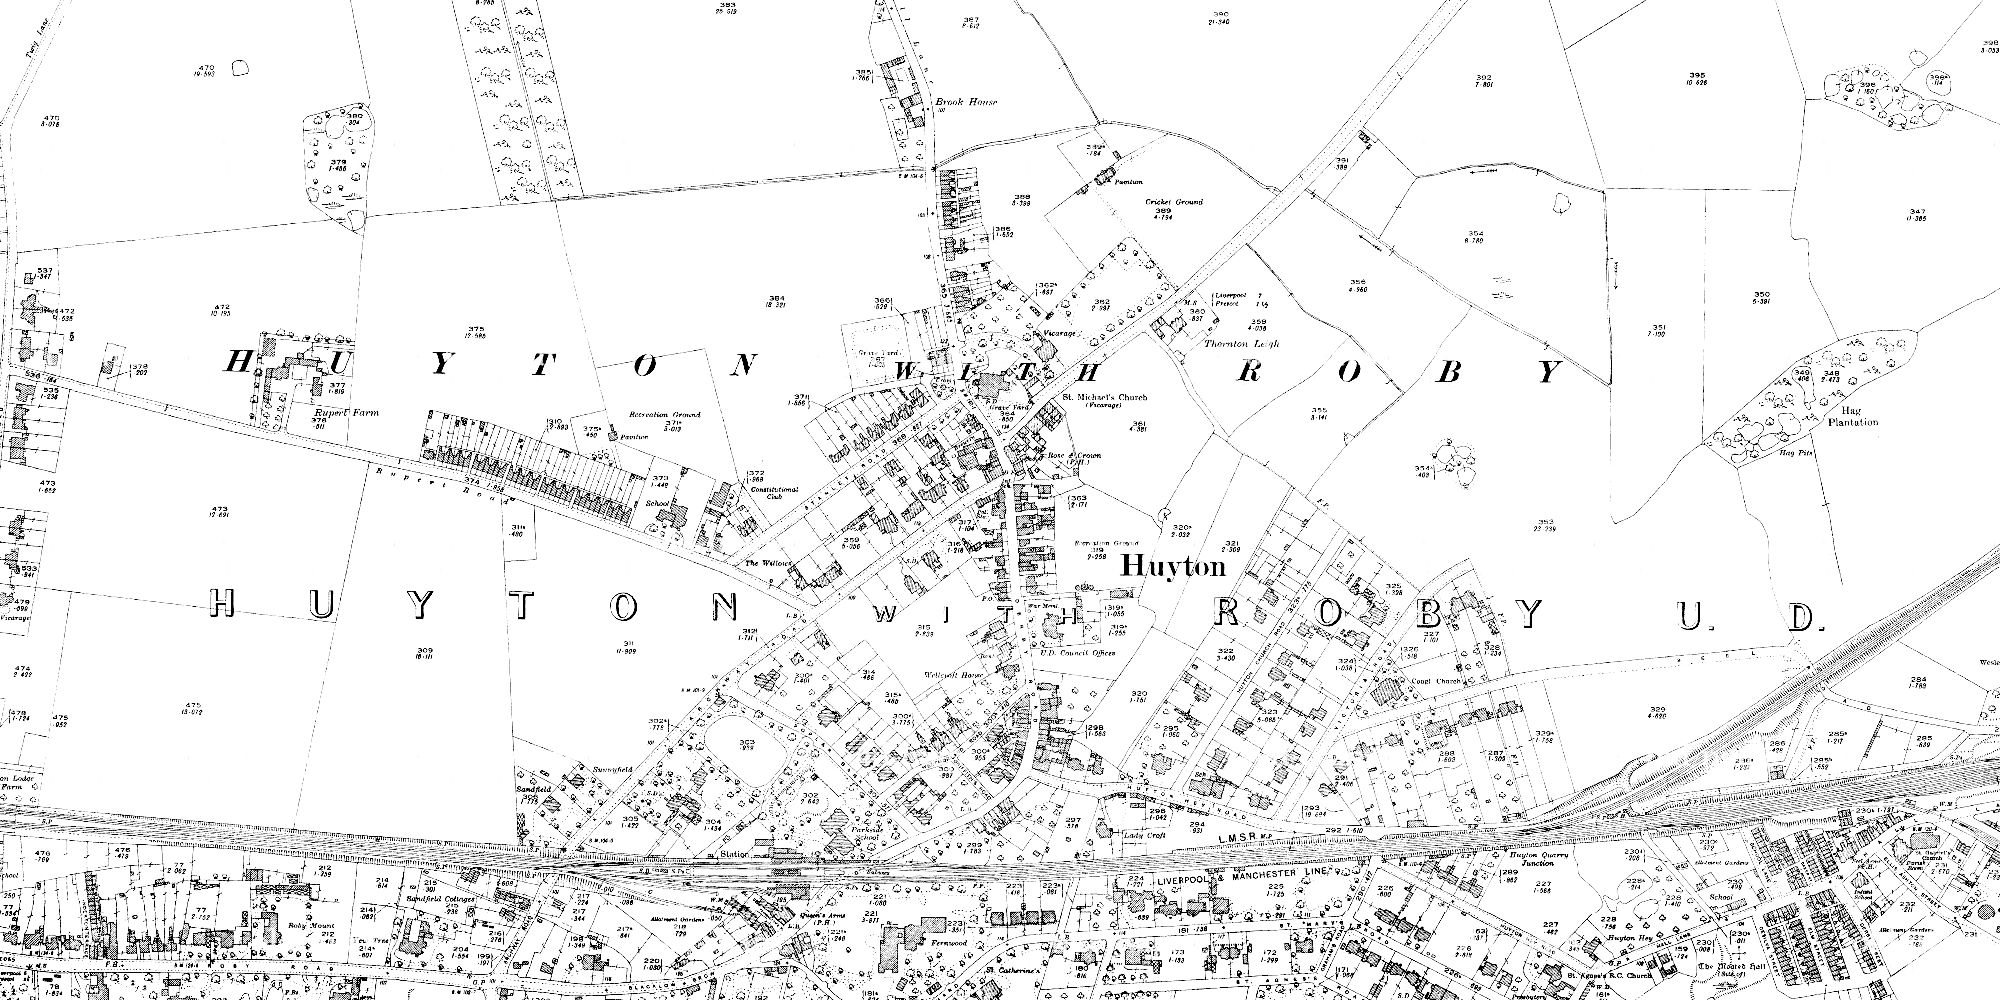 OS map of Huyton, 1927 (1:2500)